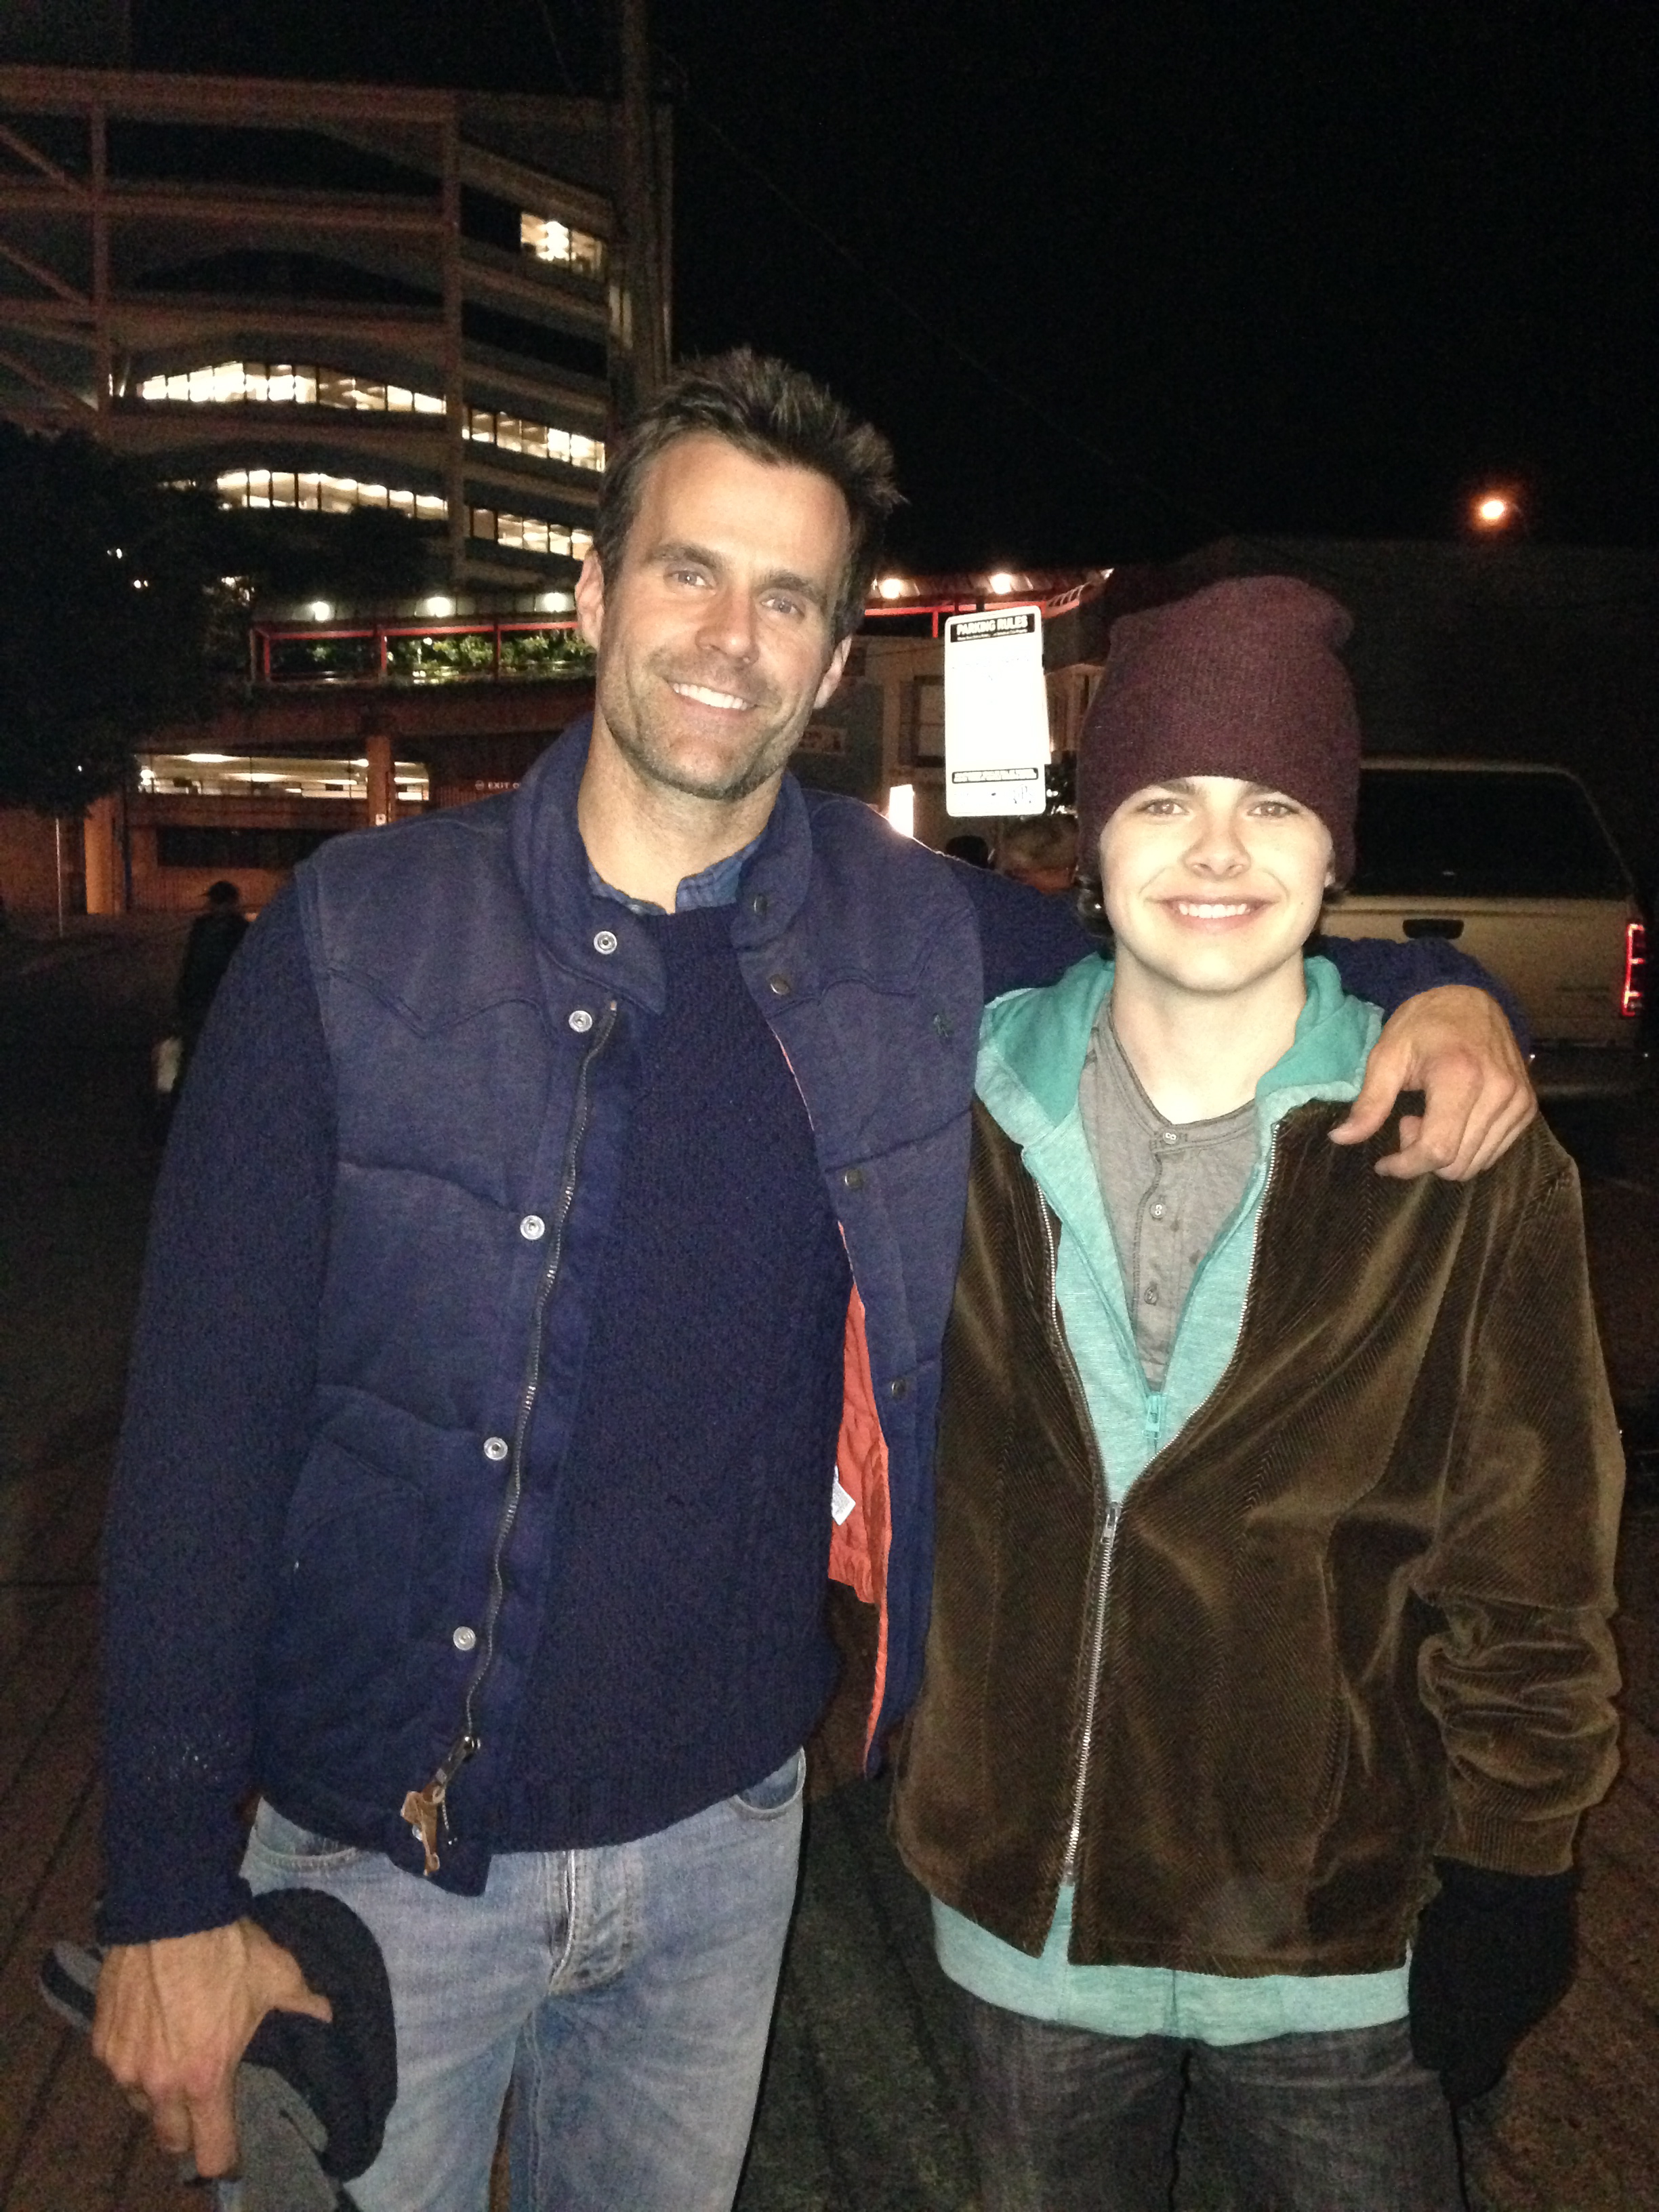 Brendan Meyer and Cameron Mathison on the set of The Christmas Ornament.